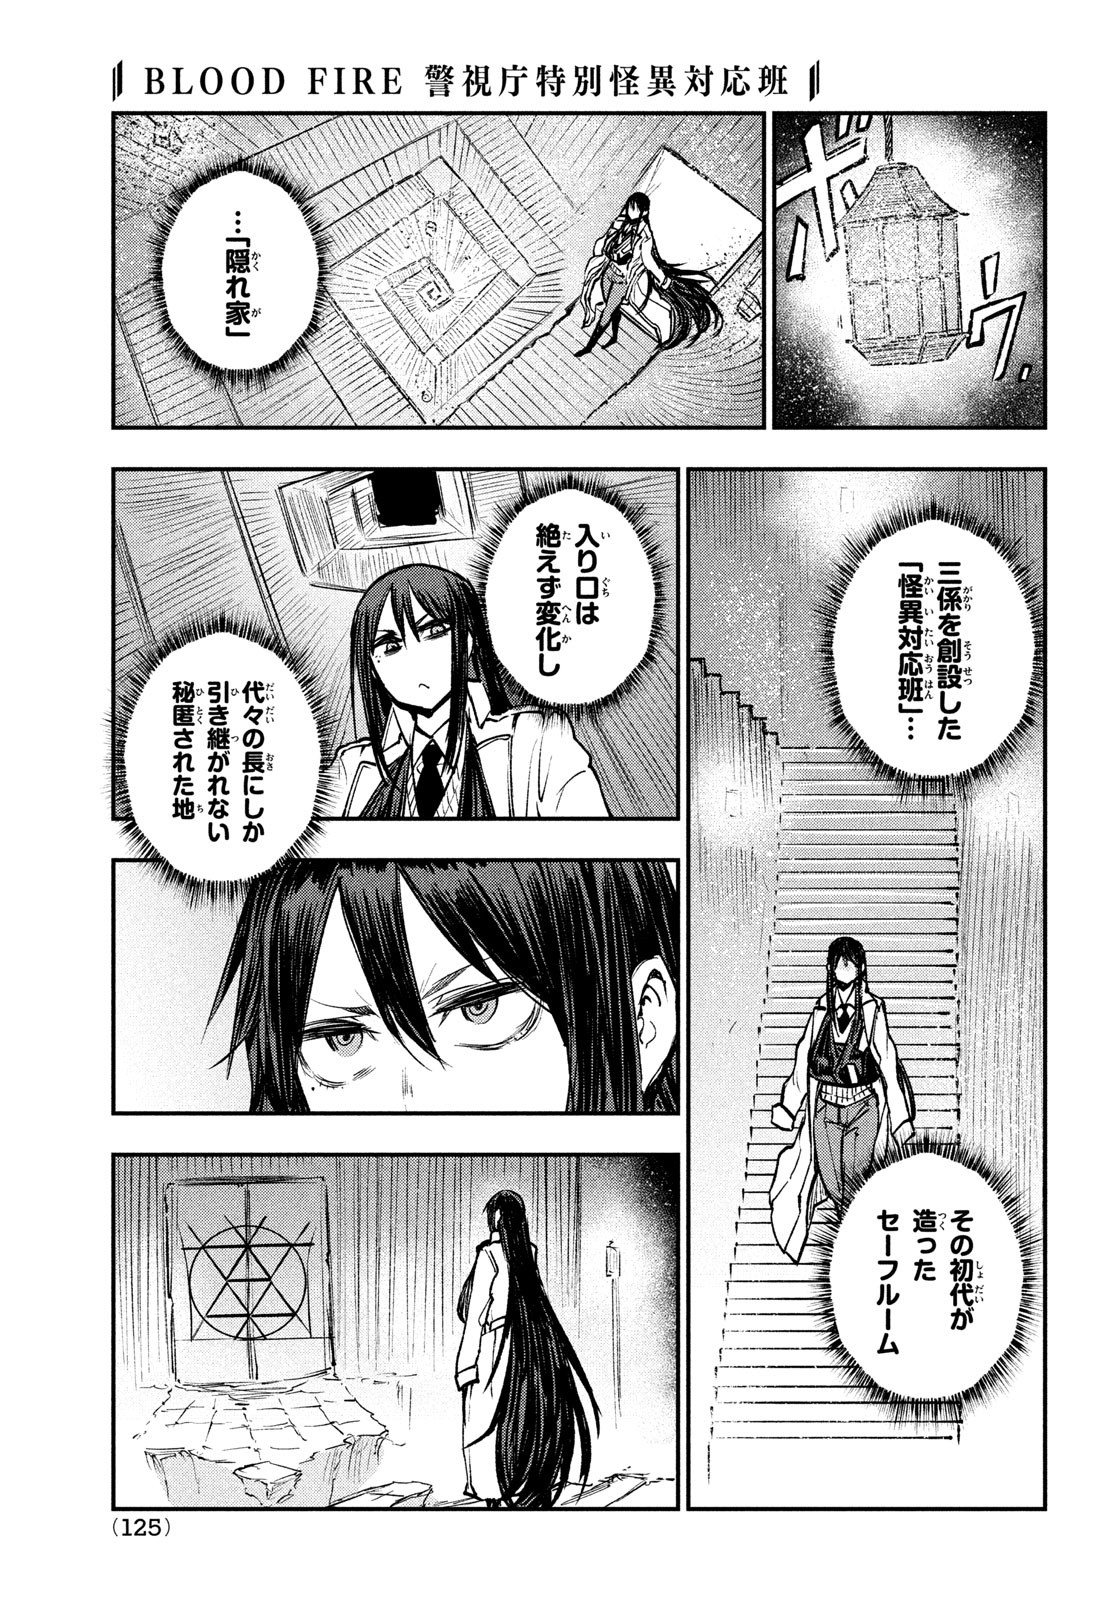 BLOODFIRE警視庁特別怪異対応班 第9話 - Page 8